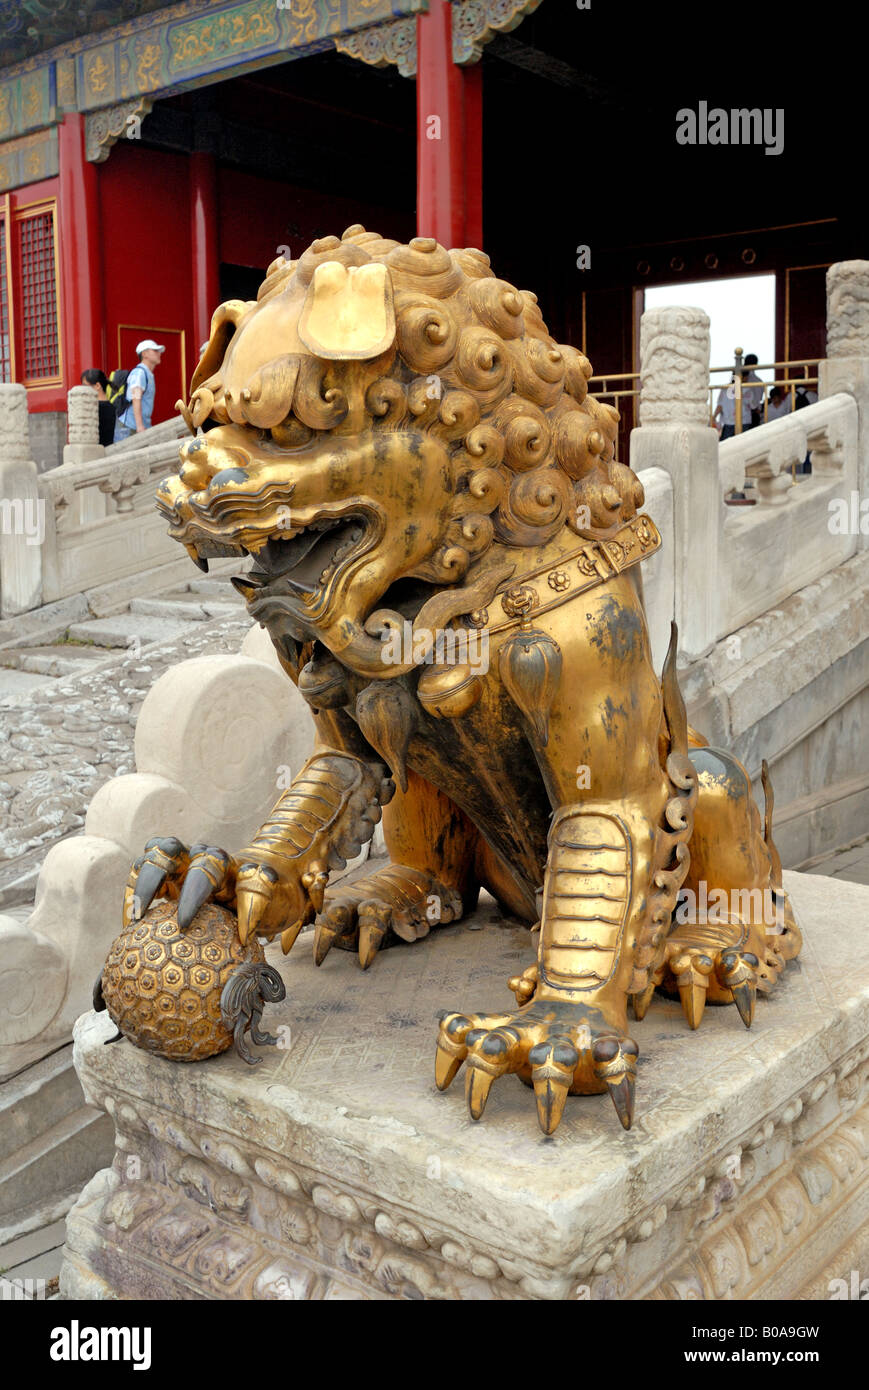 Male lion in the Forbidden City has a ball under its paw representing the imperial power China Asia Beijing Peking City Stock Photo